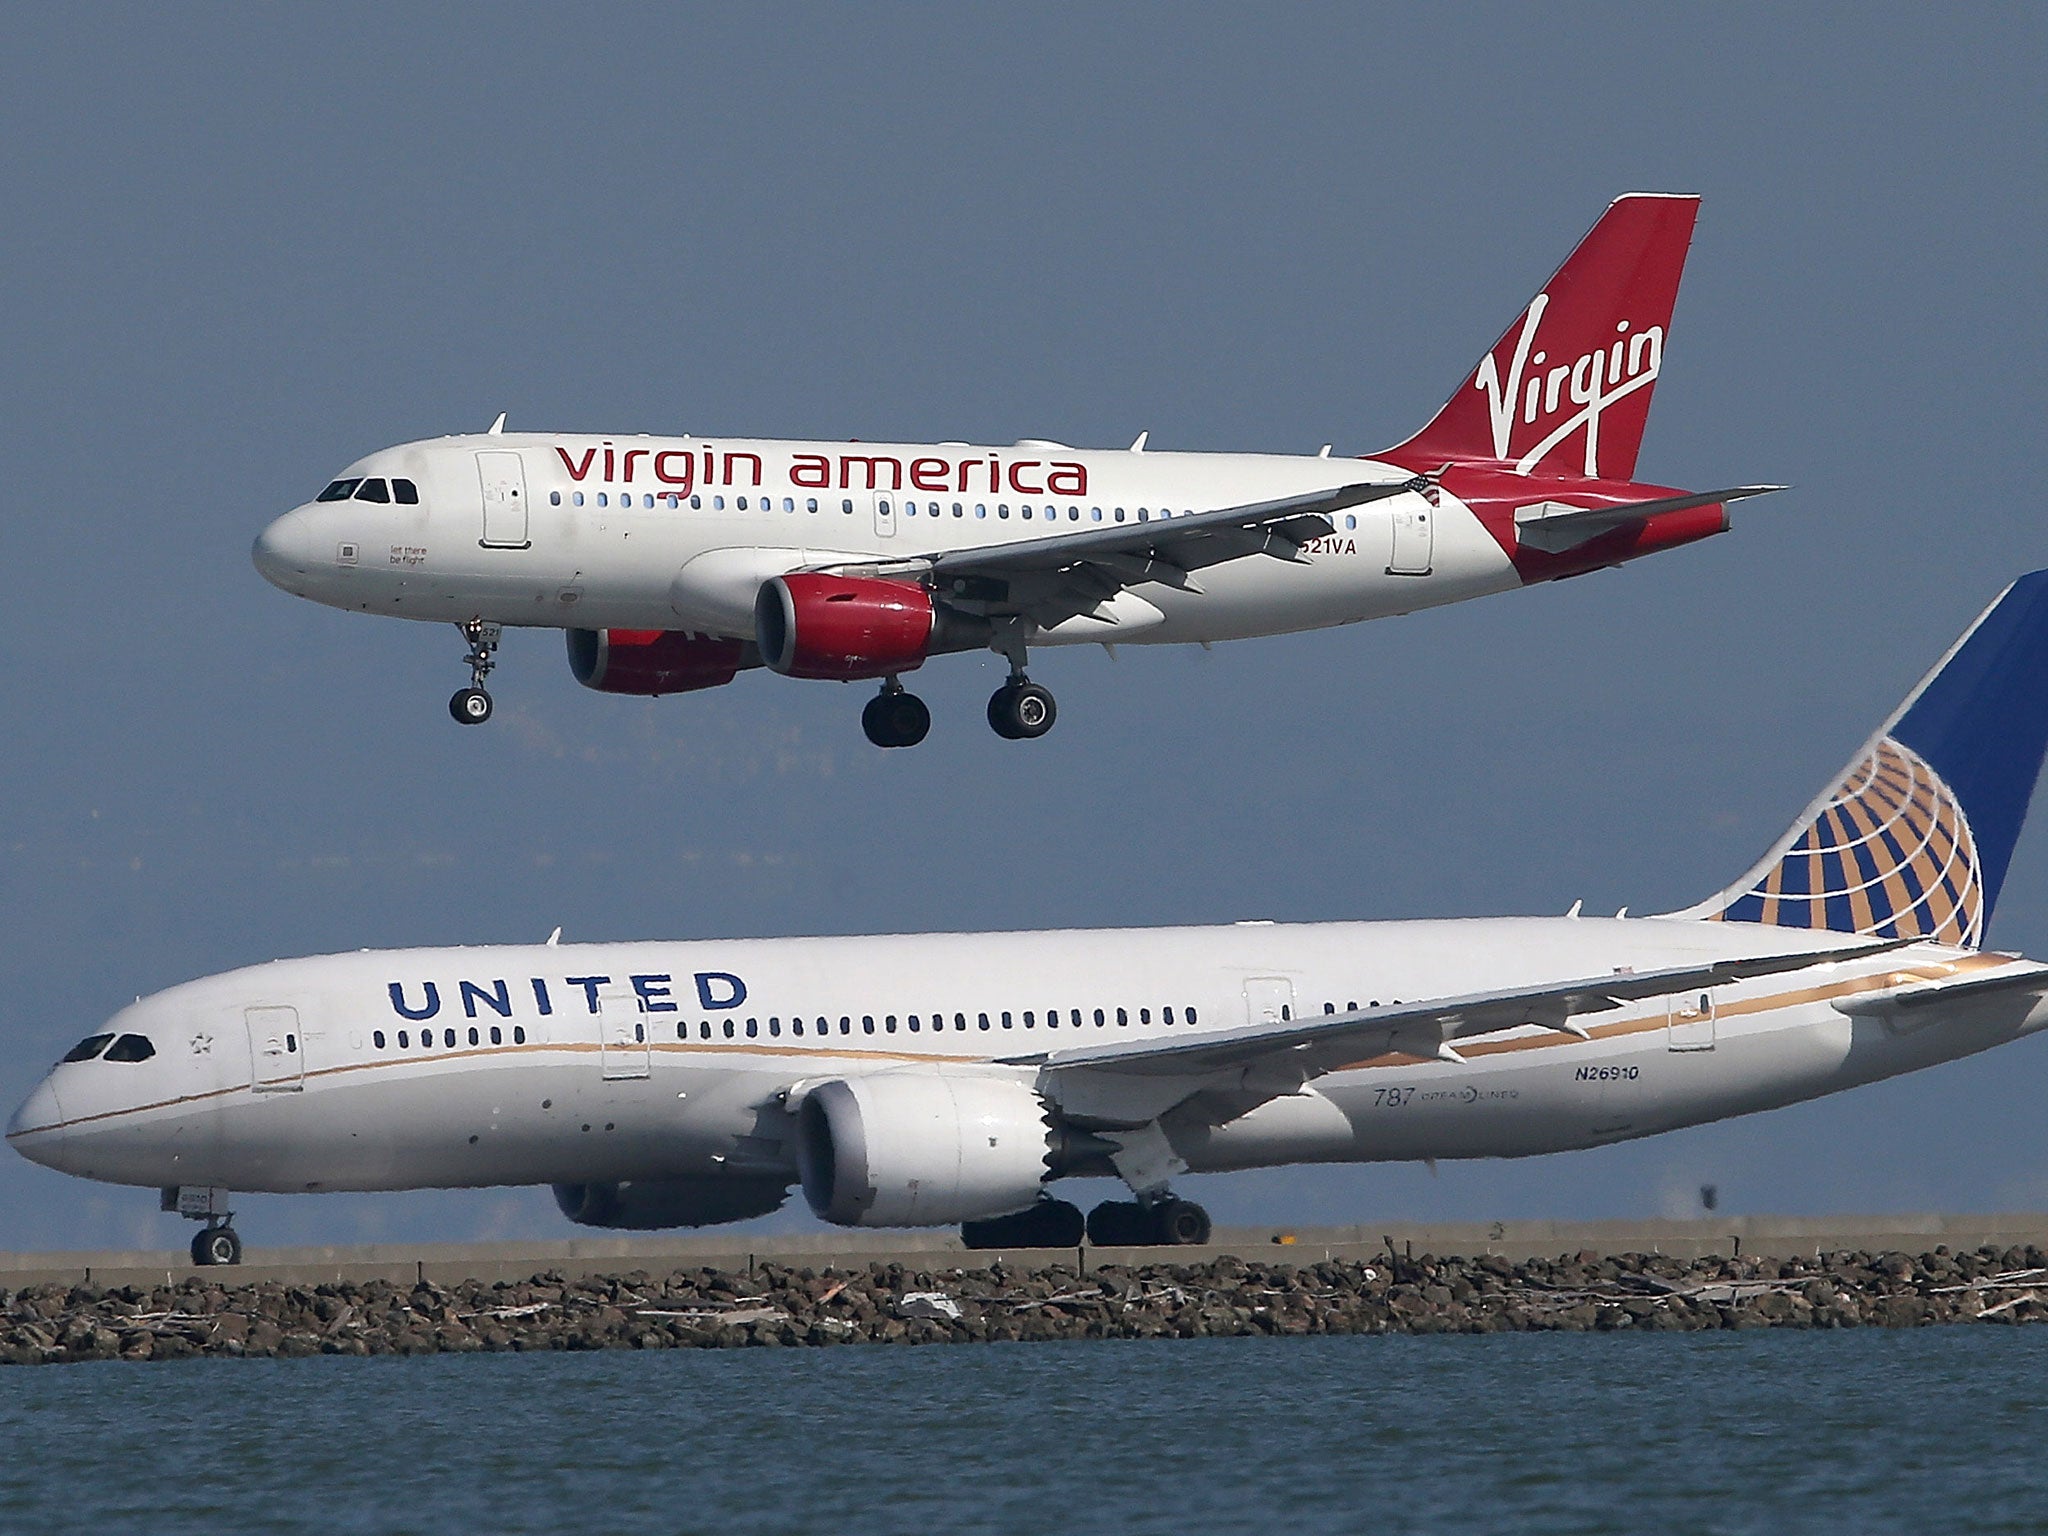 Virgin America came first while United came eighth